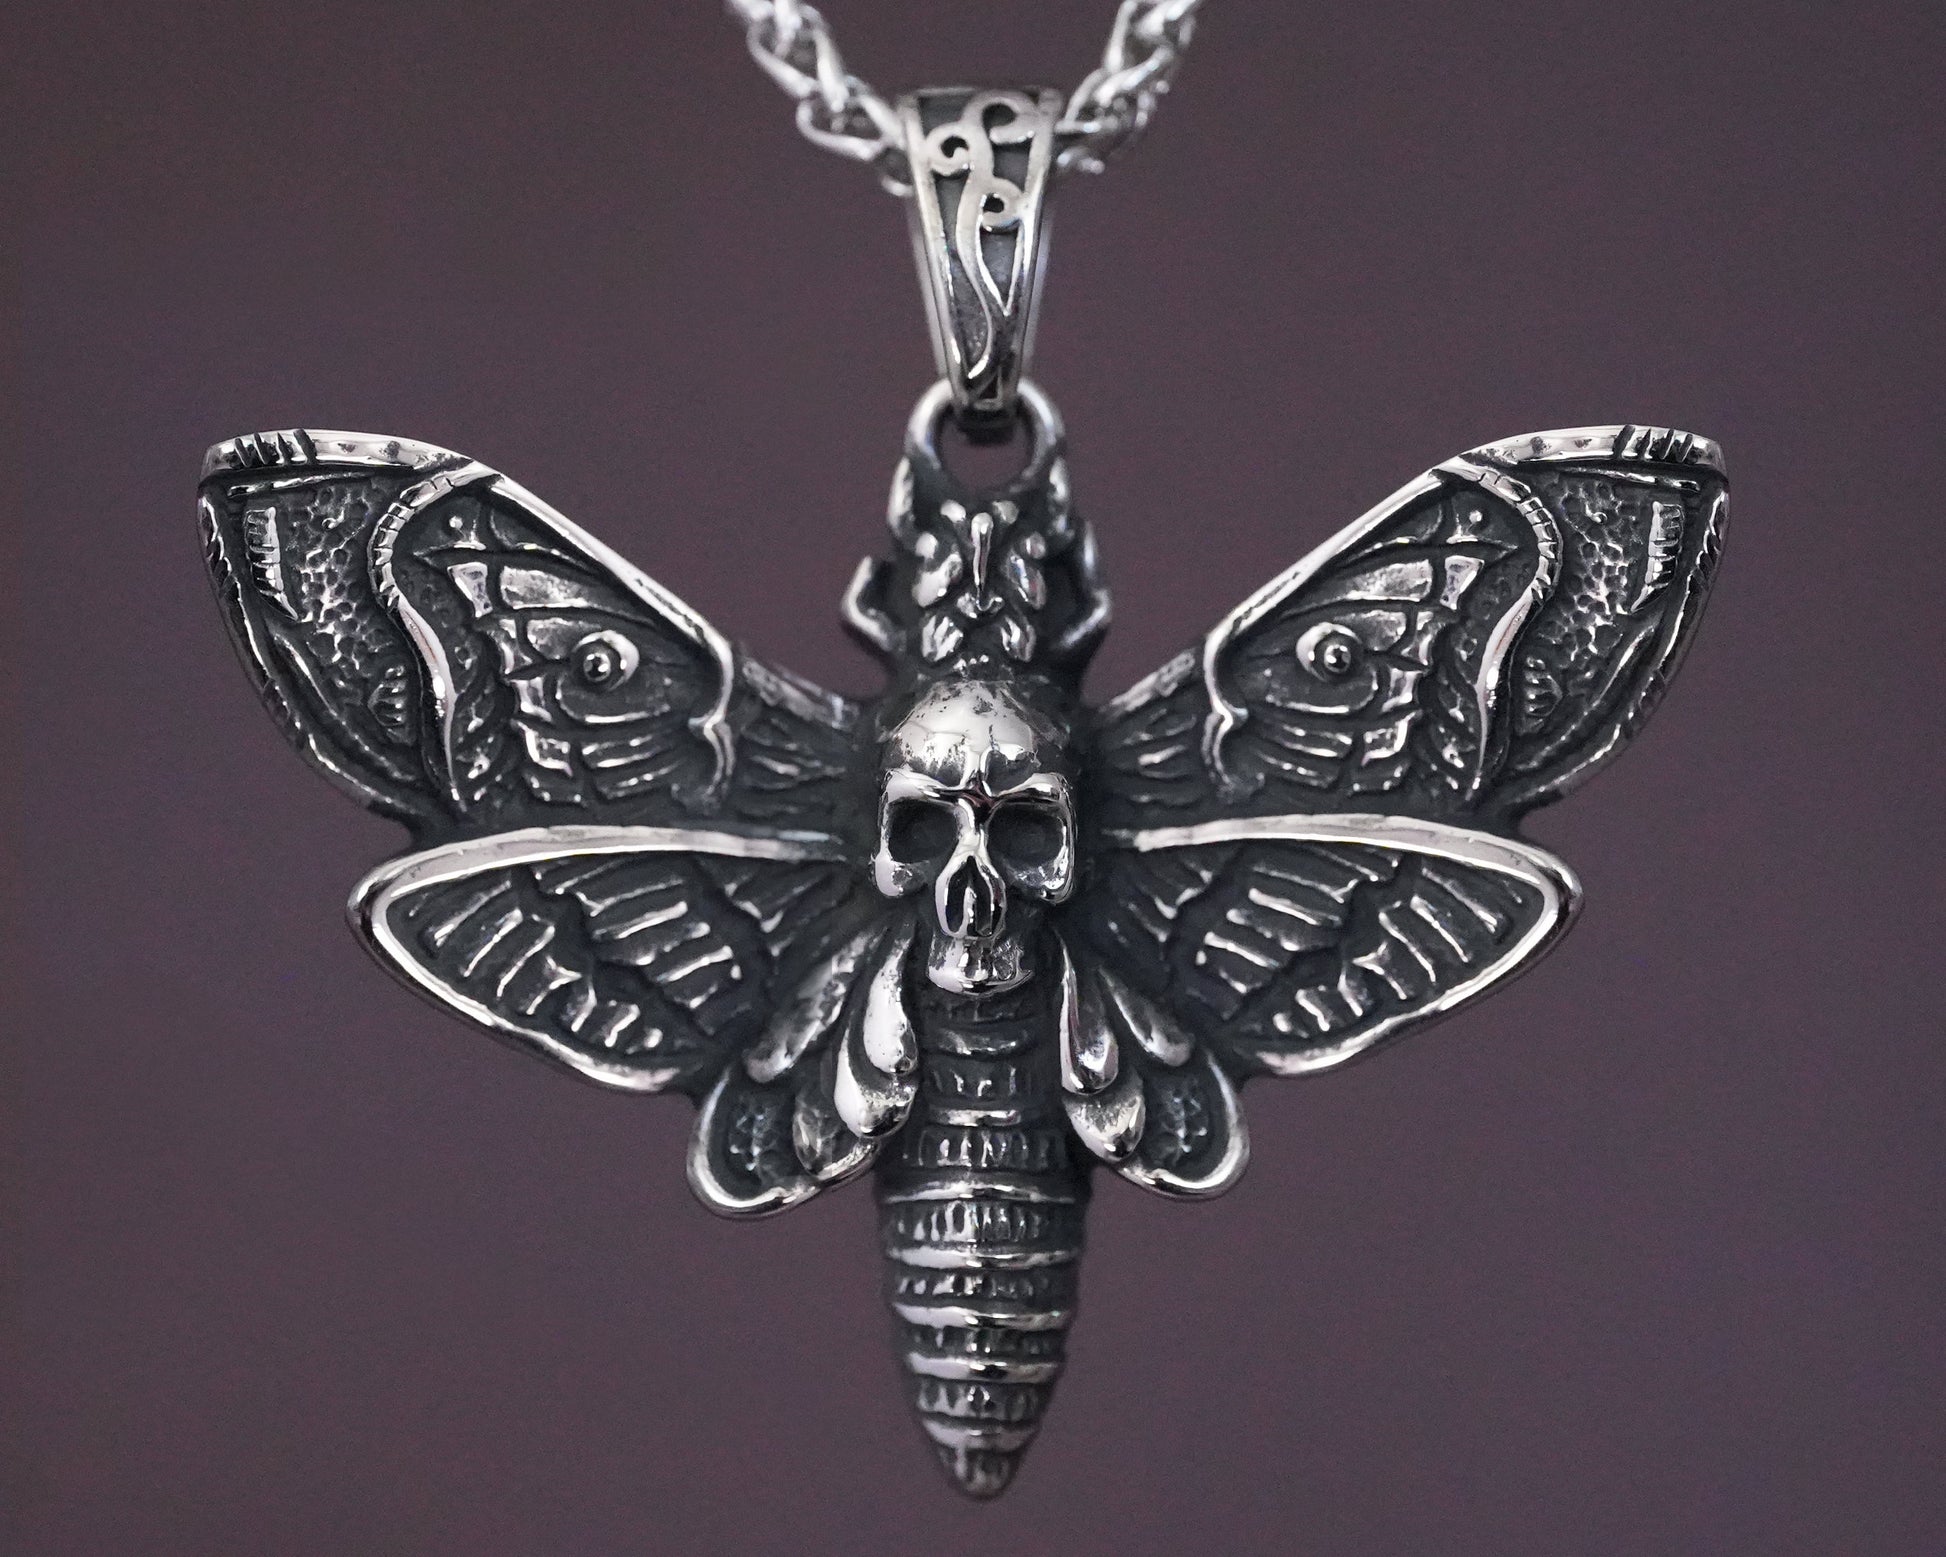 Death Skull Hawk Moth Necklace With Chain Stainless Steel - Gothic Transformation Life Cycle Symbol Moth pendant, Death Head Moth Large - Baldur Jewelry